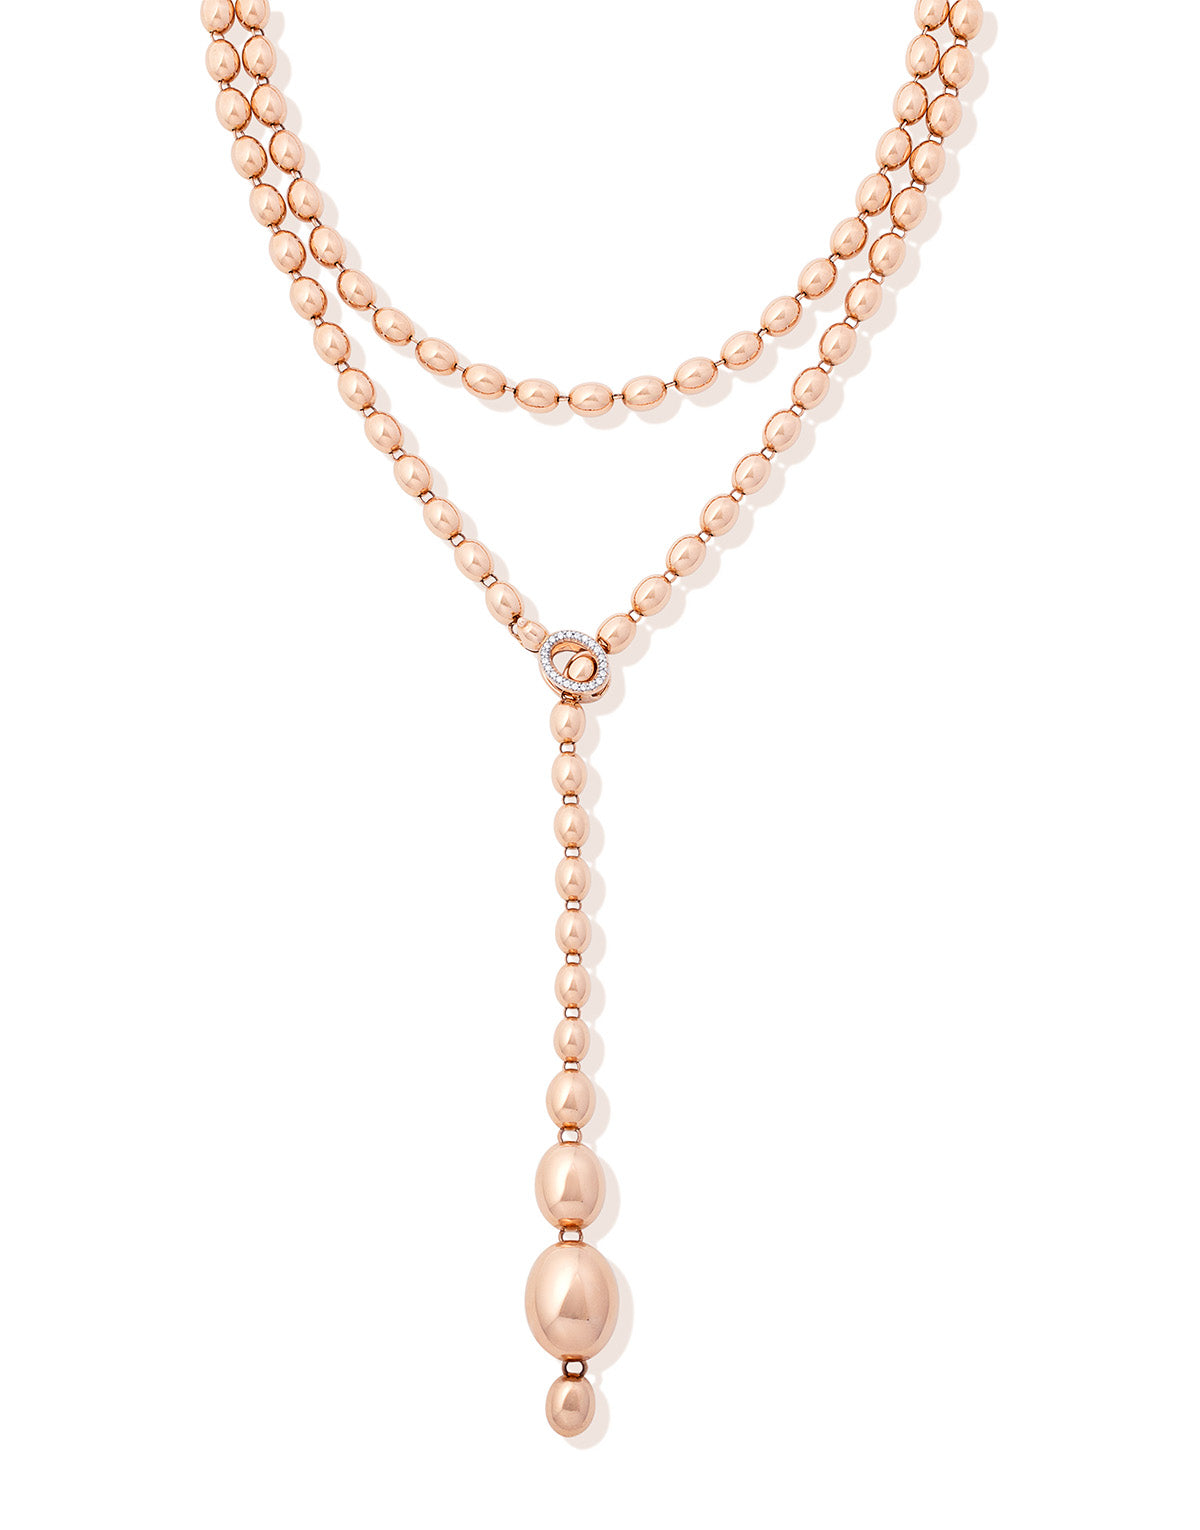 "Ivy" rose gold and diamonds iconic convertible necklace (long)